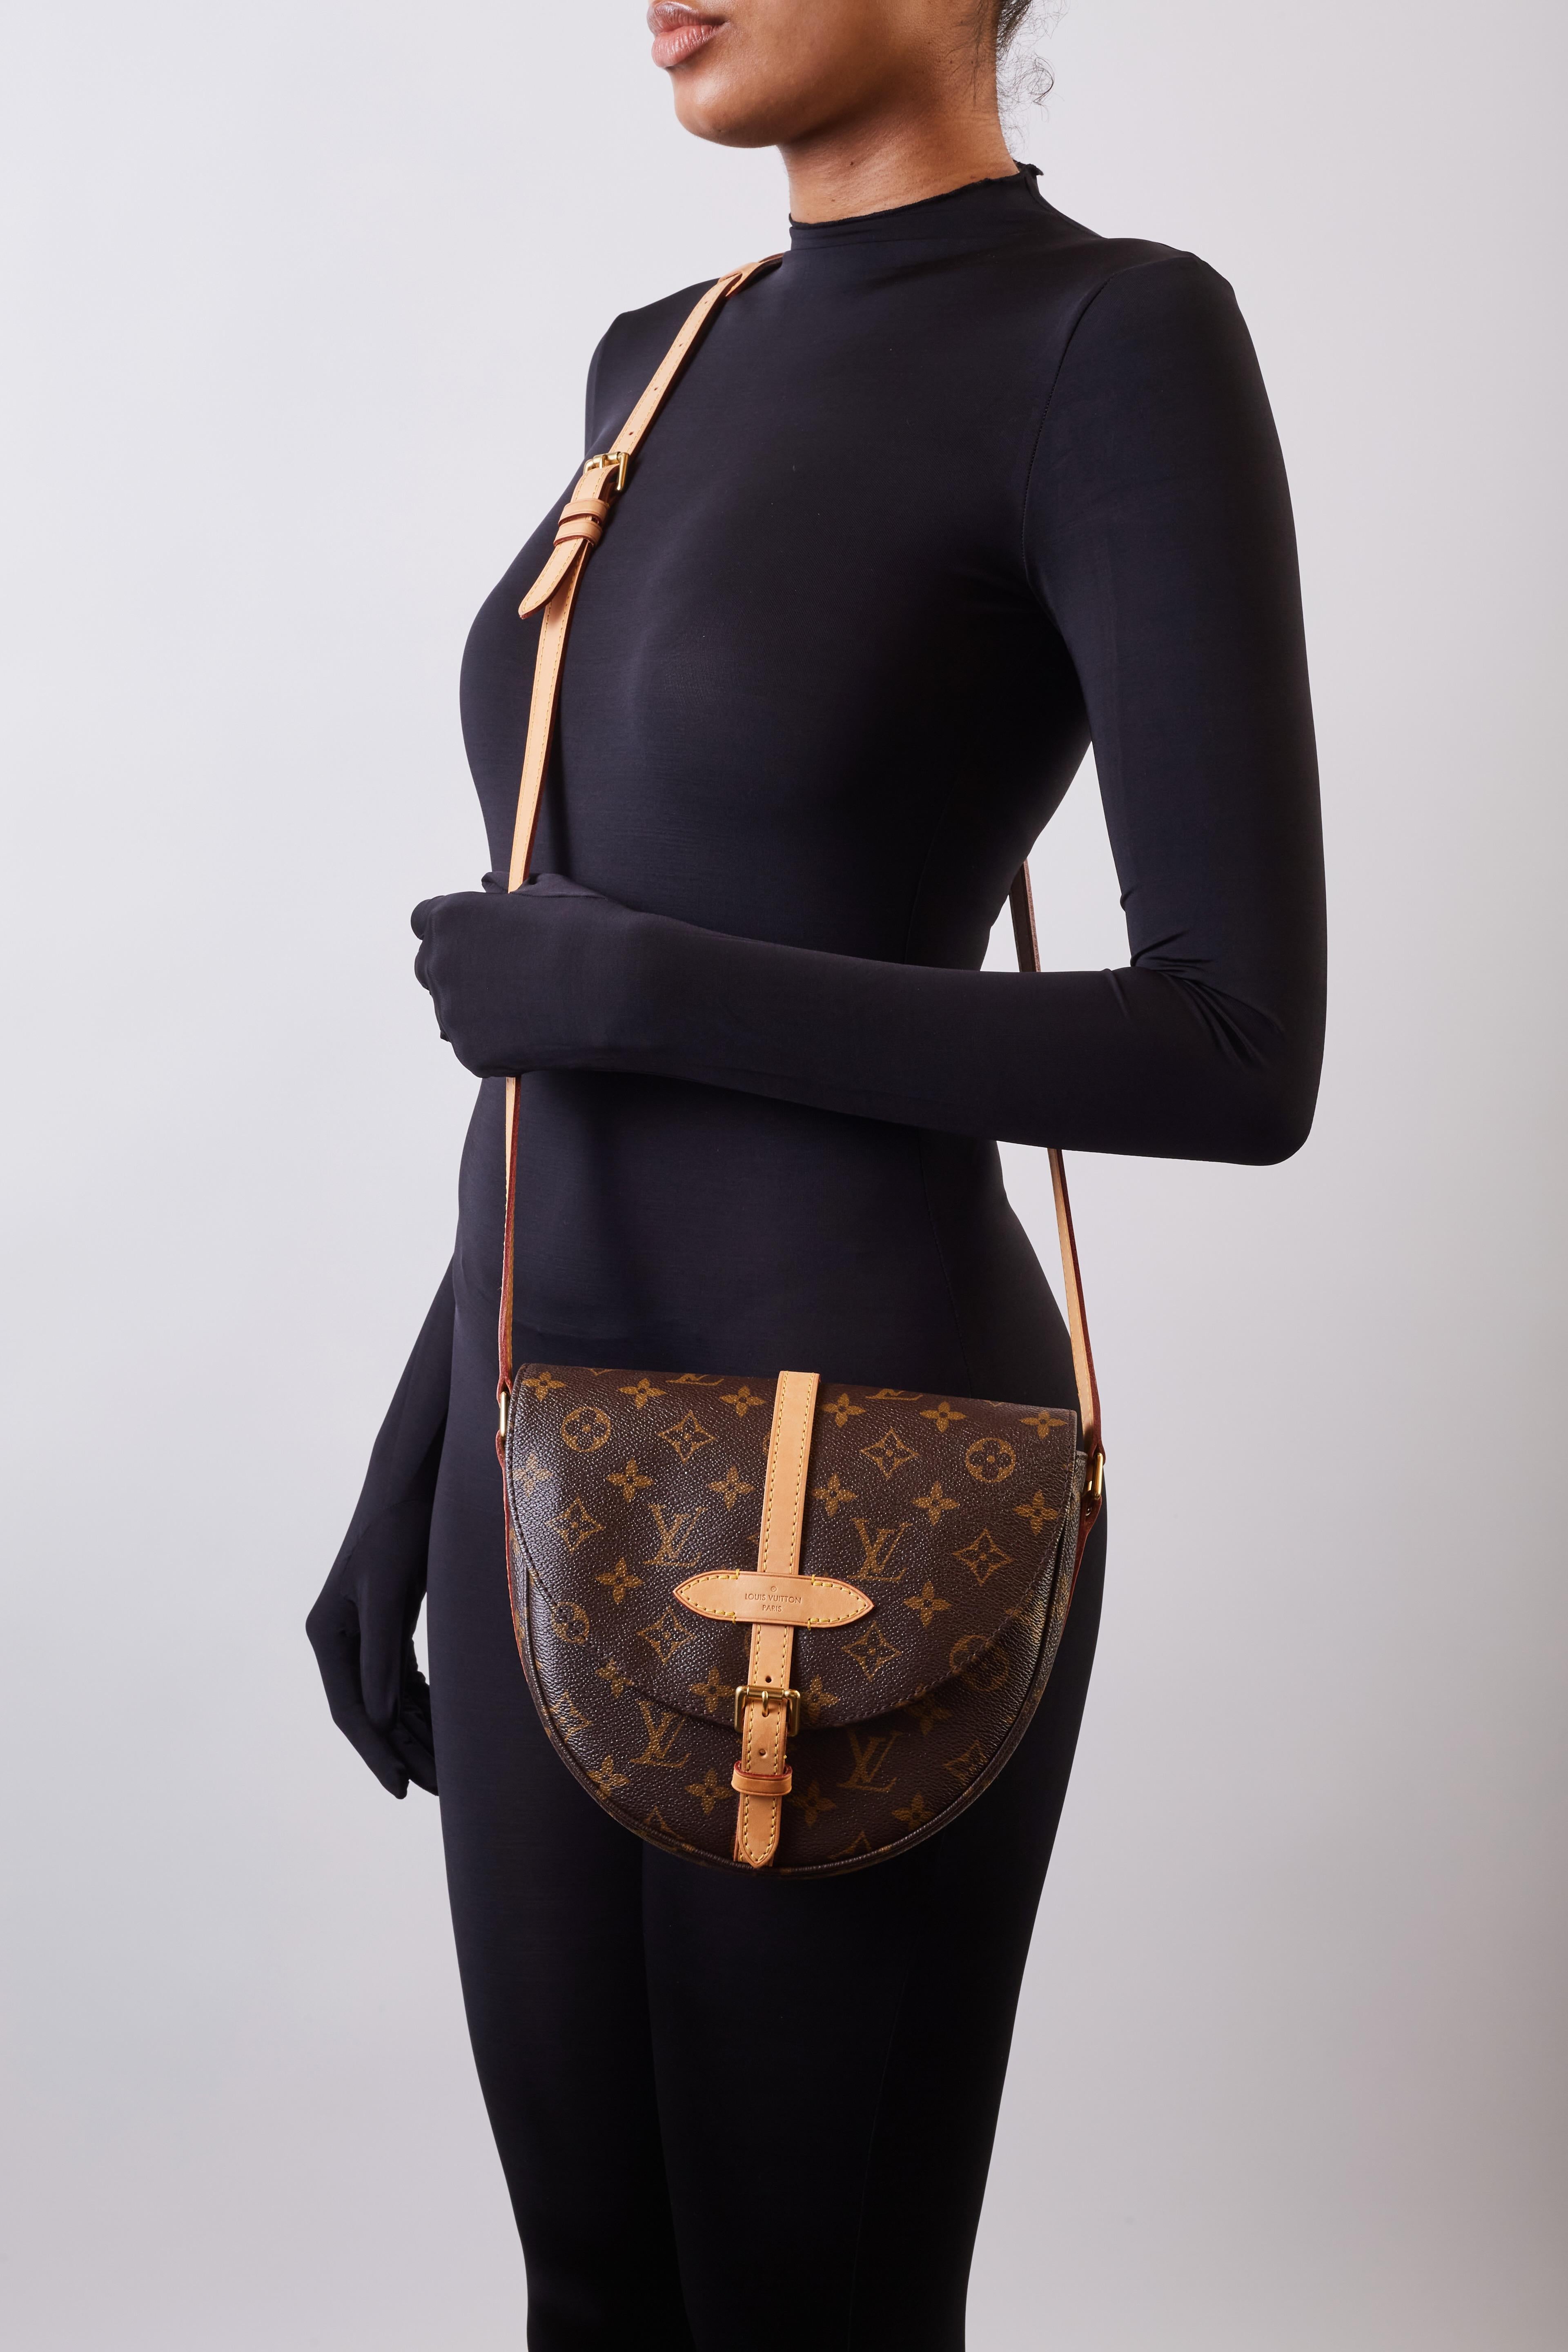 Louis Vuitton Chantilly - For Sale on 1stDibs | lv chantilly bag, vuitton chantilly louis vuitton chantilly bag